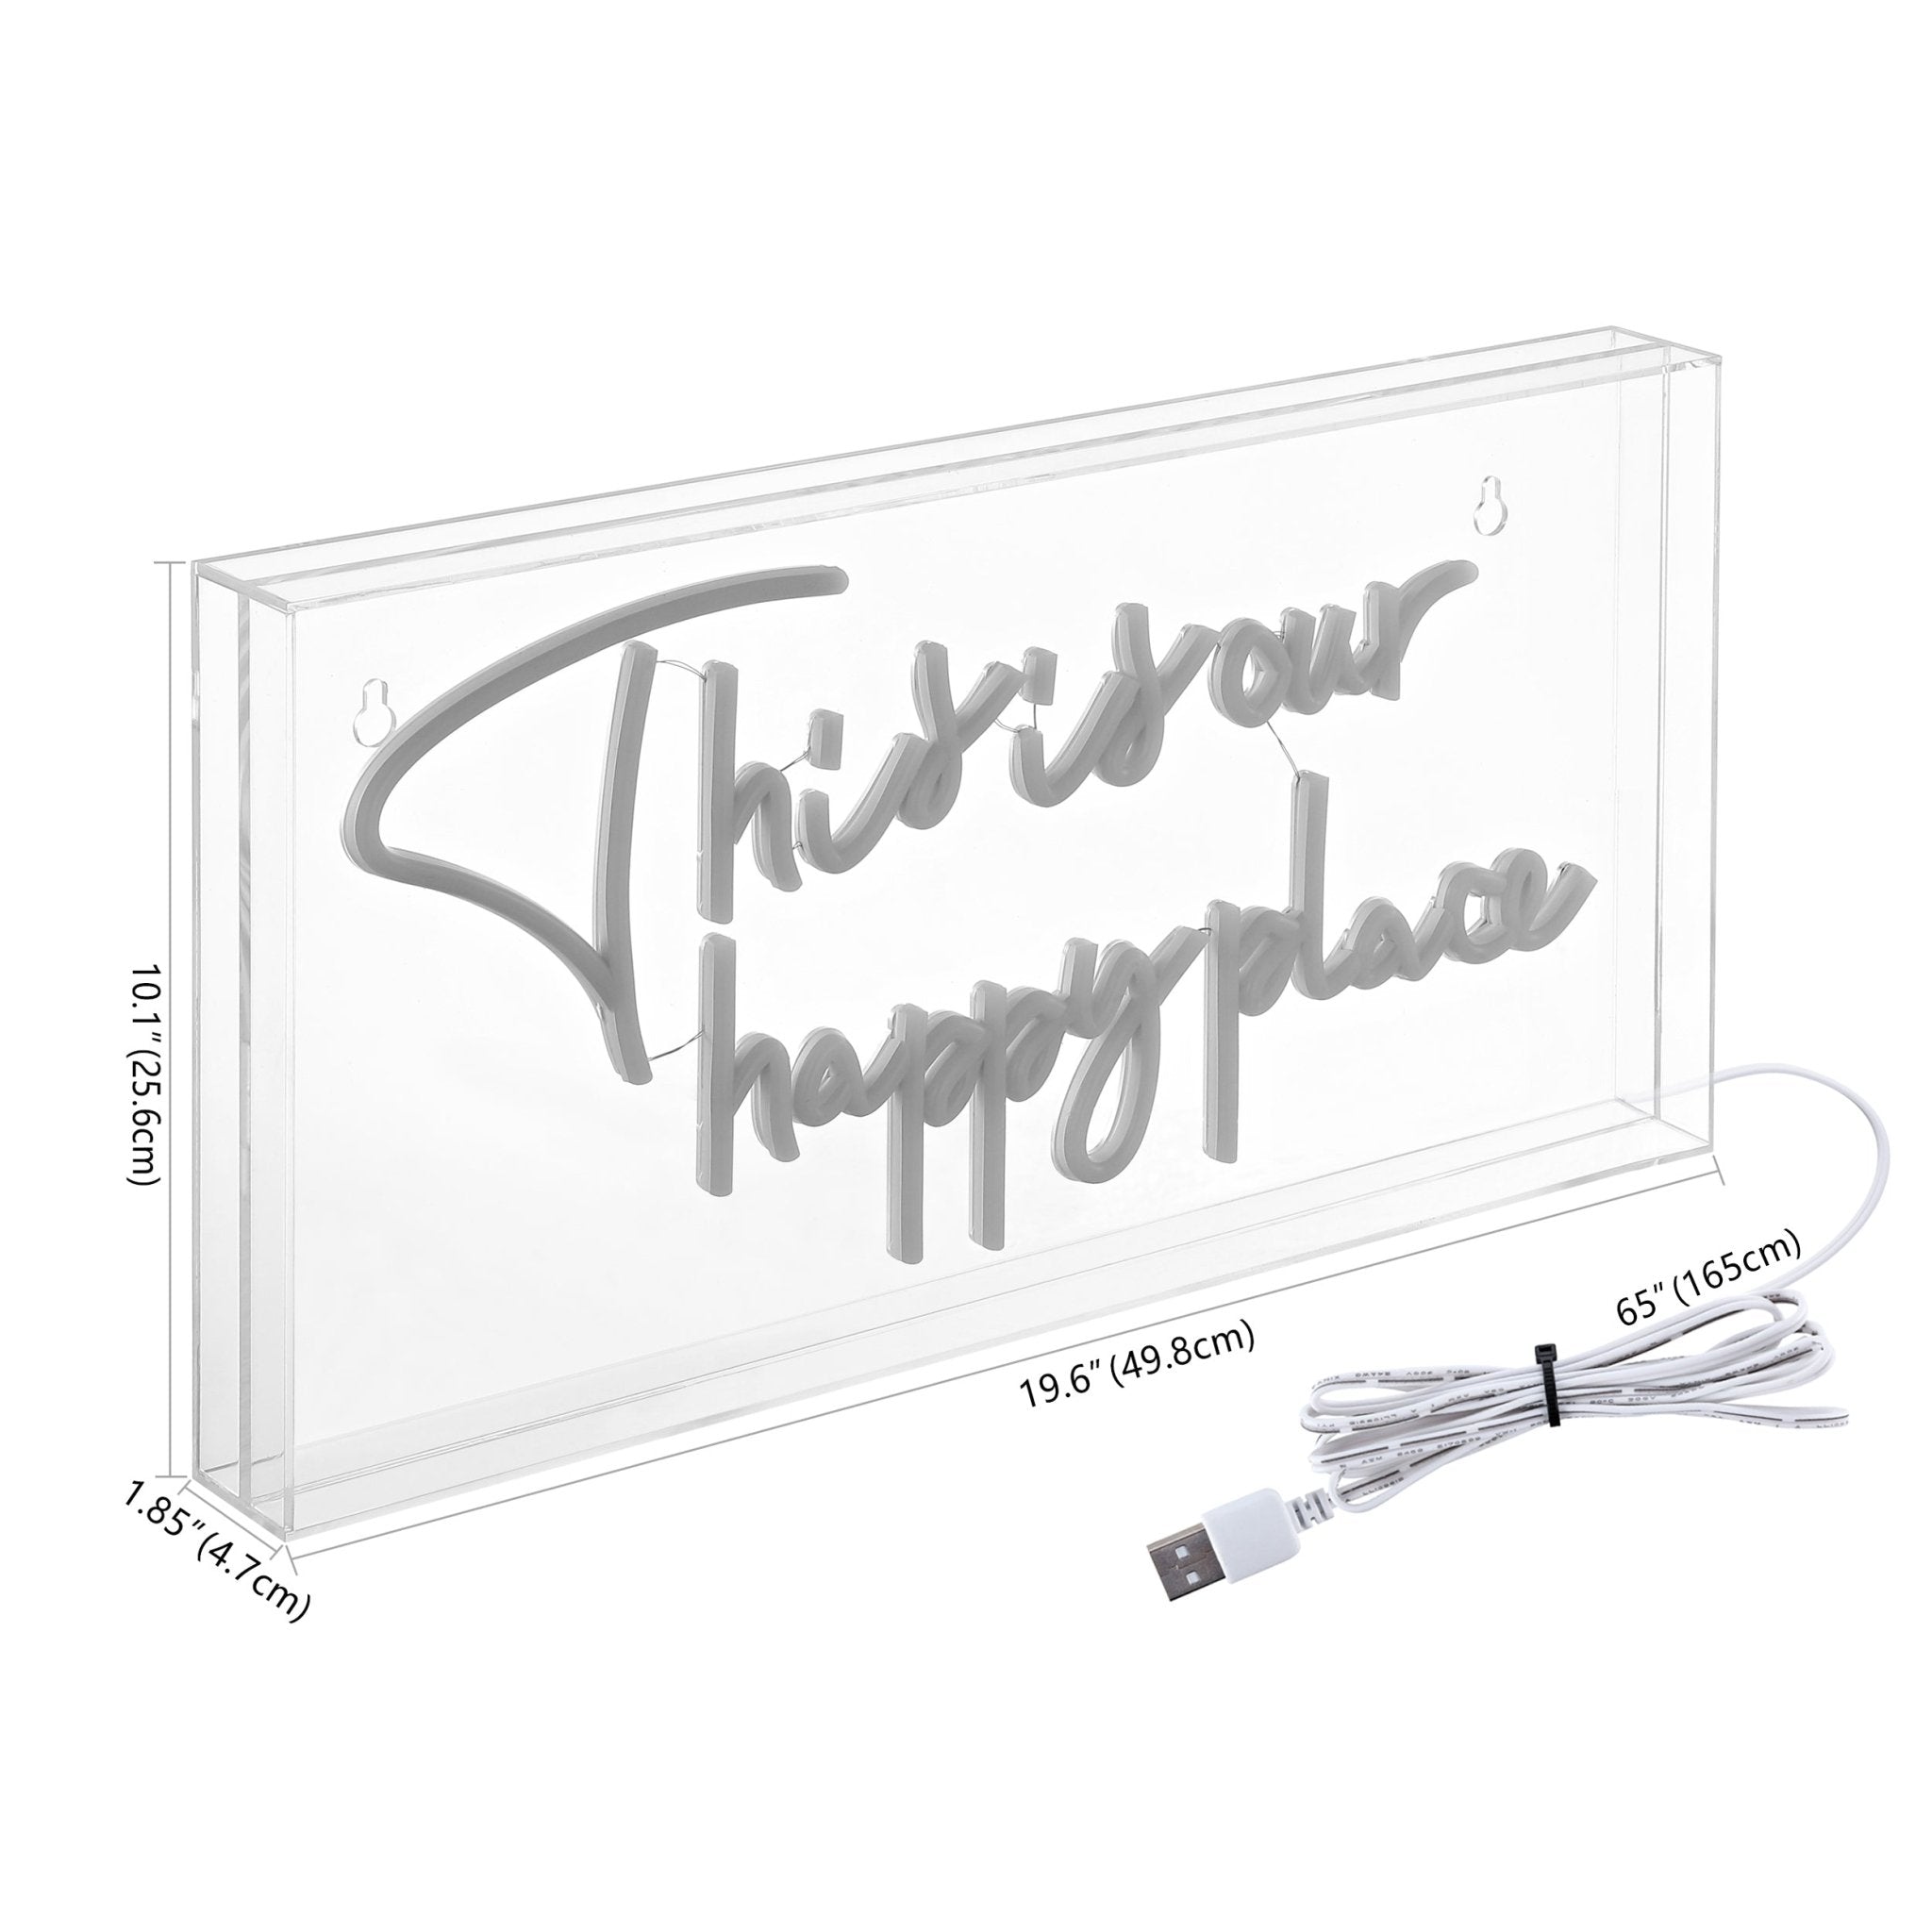 This Is Your Happy Place X Contemporary Glam Acrylic Box - Decorative Lighting